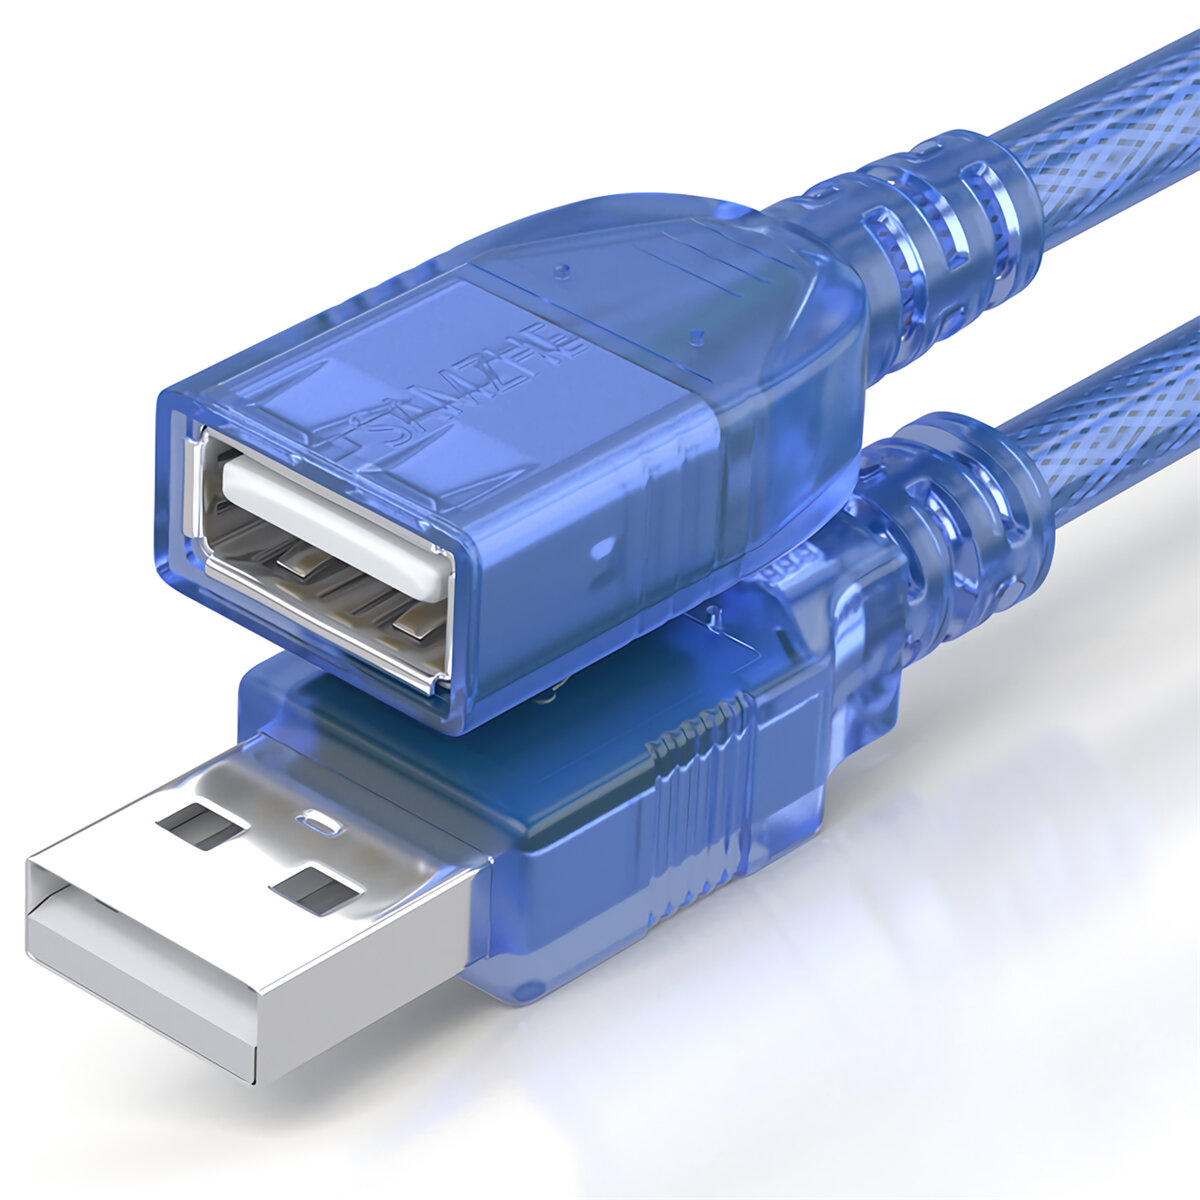 

SAMZHE USB 2.0 Extension Cable USB Male to Female Data Cable Transparent Blue High Speed USB Extension Cord BL-903